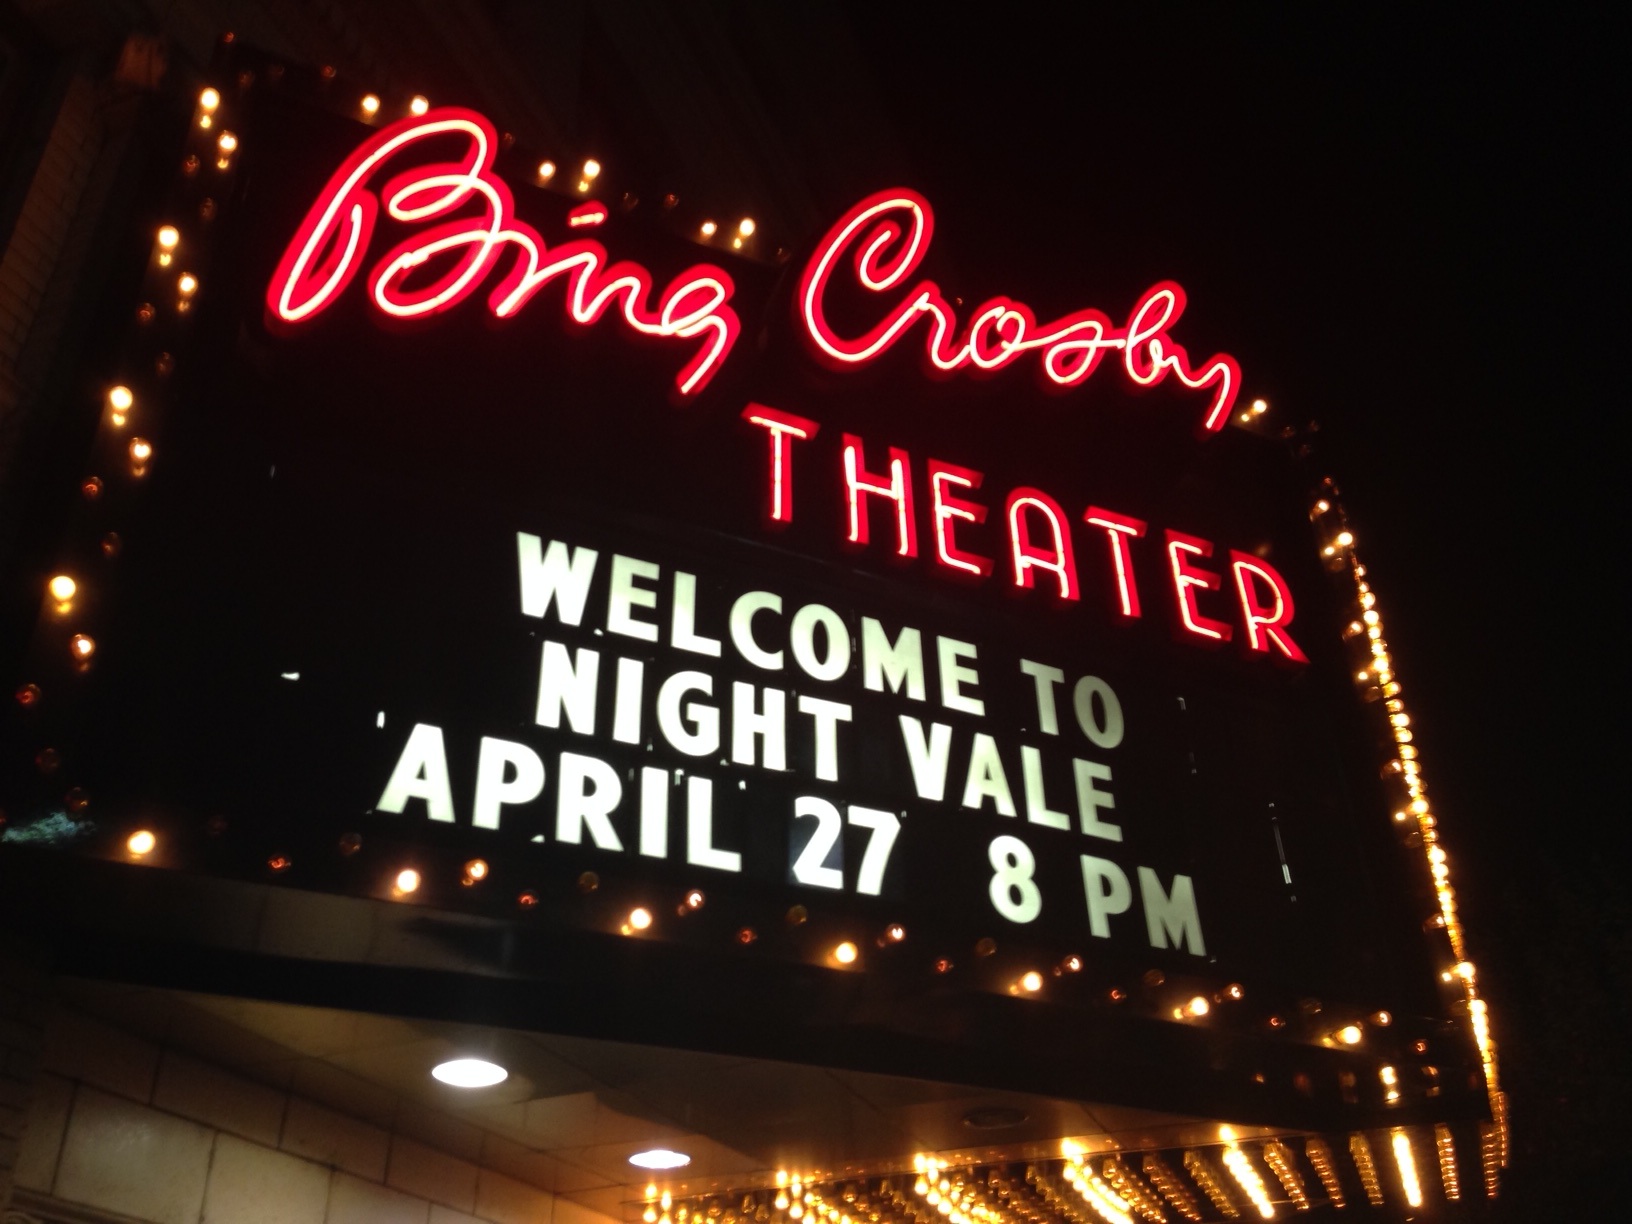 The Bing marquee